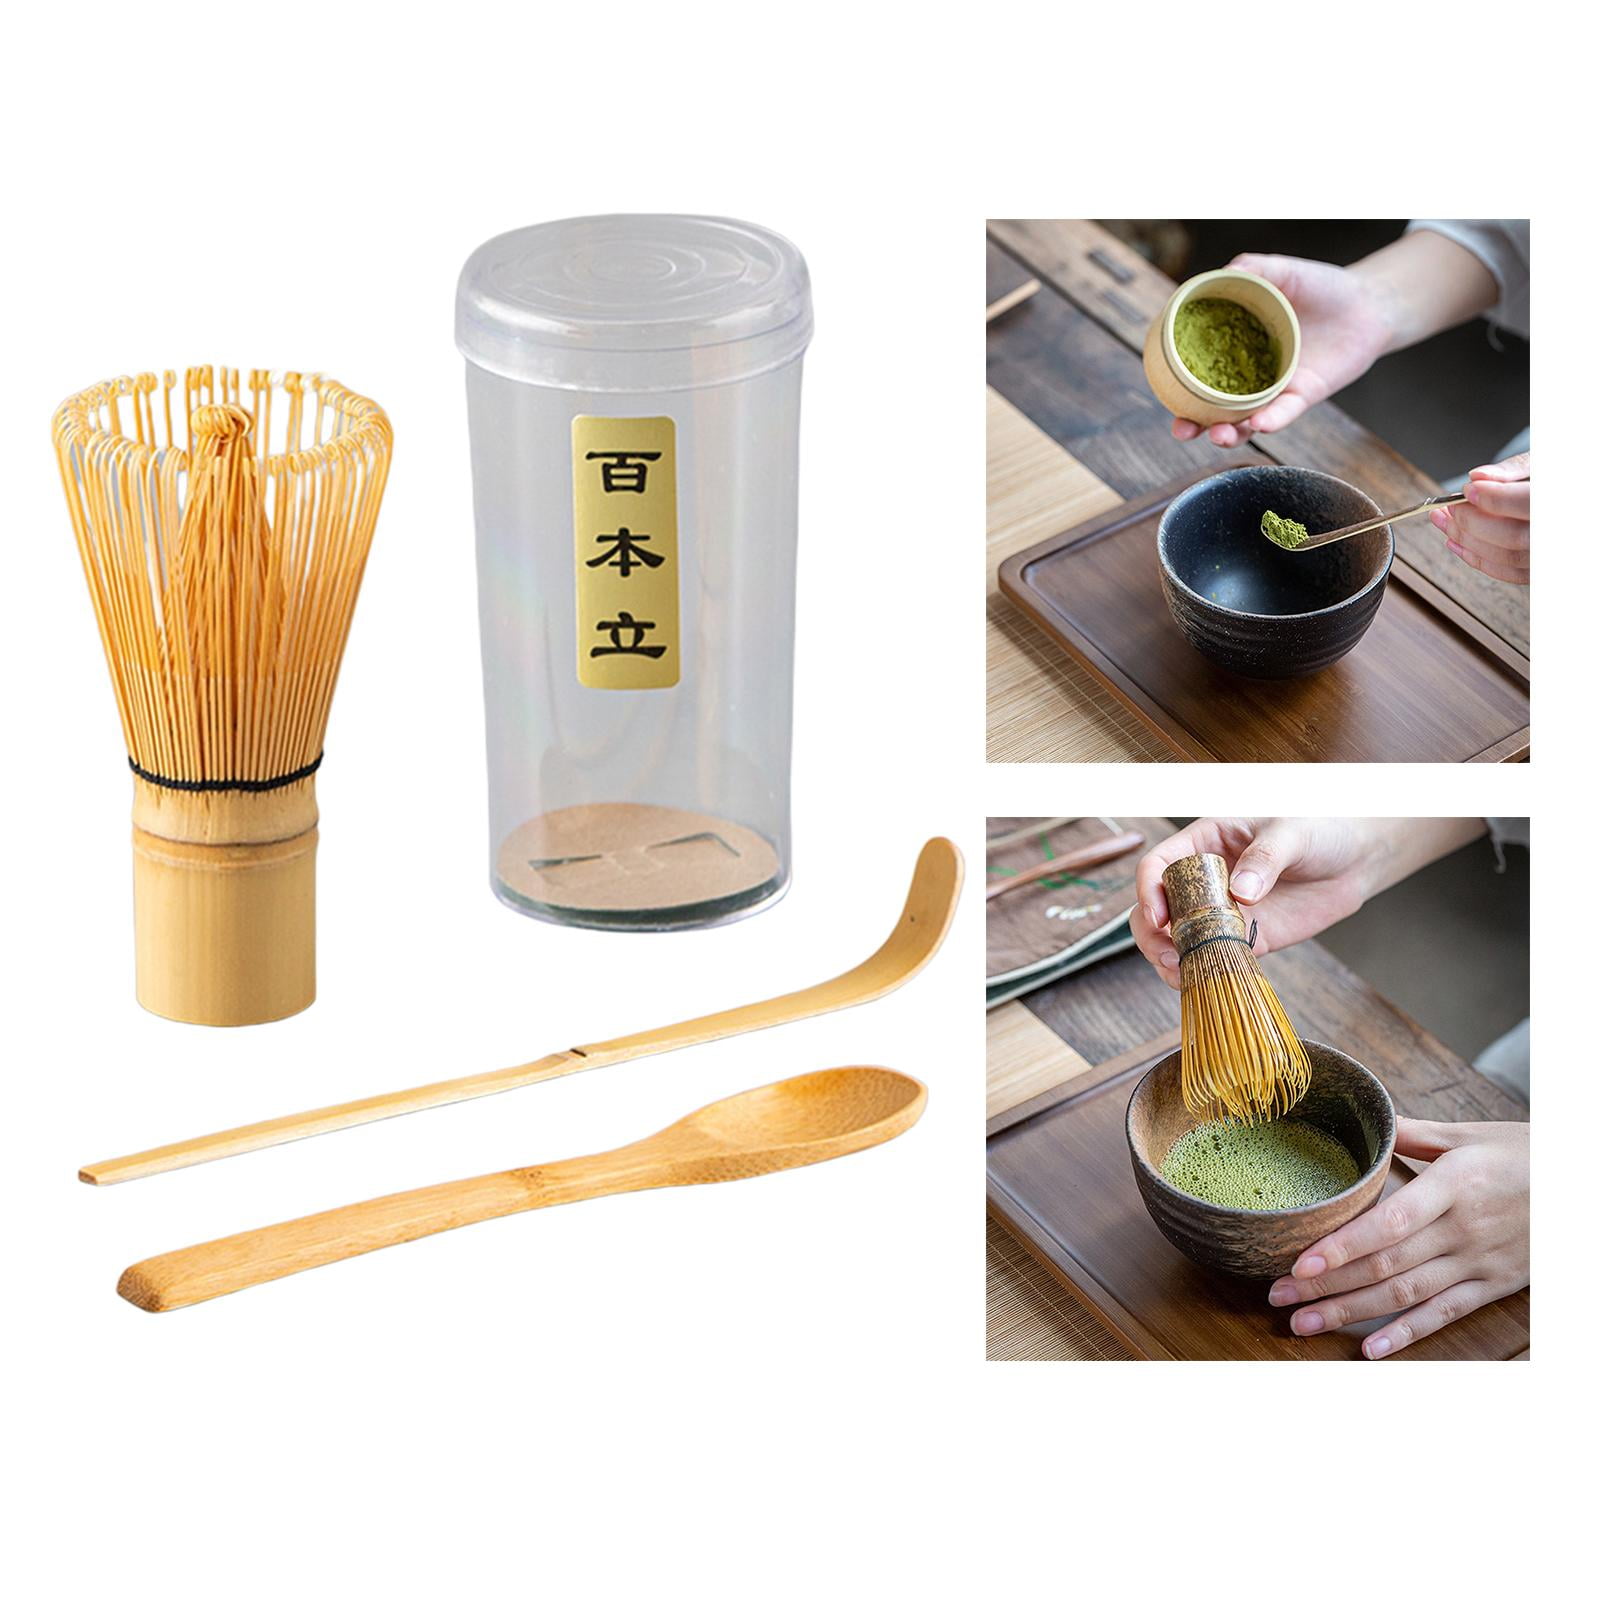 BambooWorx Matcha Whisk Set - Matcha Whisk (Chasen), Traditional Scoop  (Chashaku), Tea Spoon. The Perfect Set to Prepare a Traditional Cup of  Japanese Matcha Te…